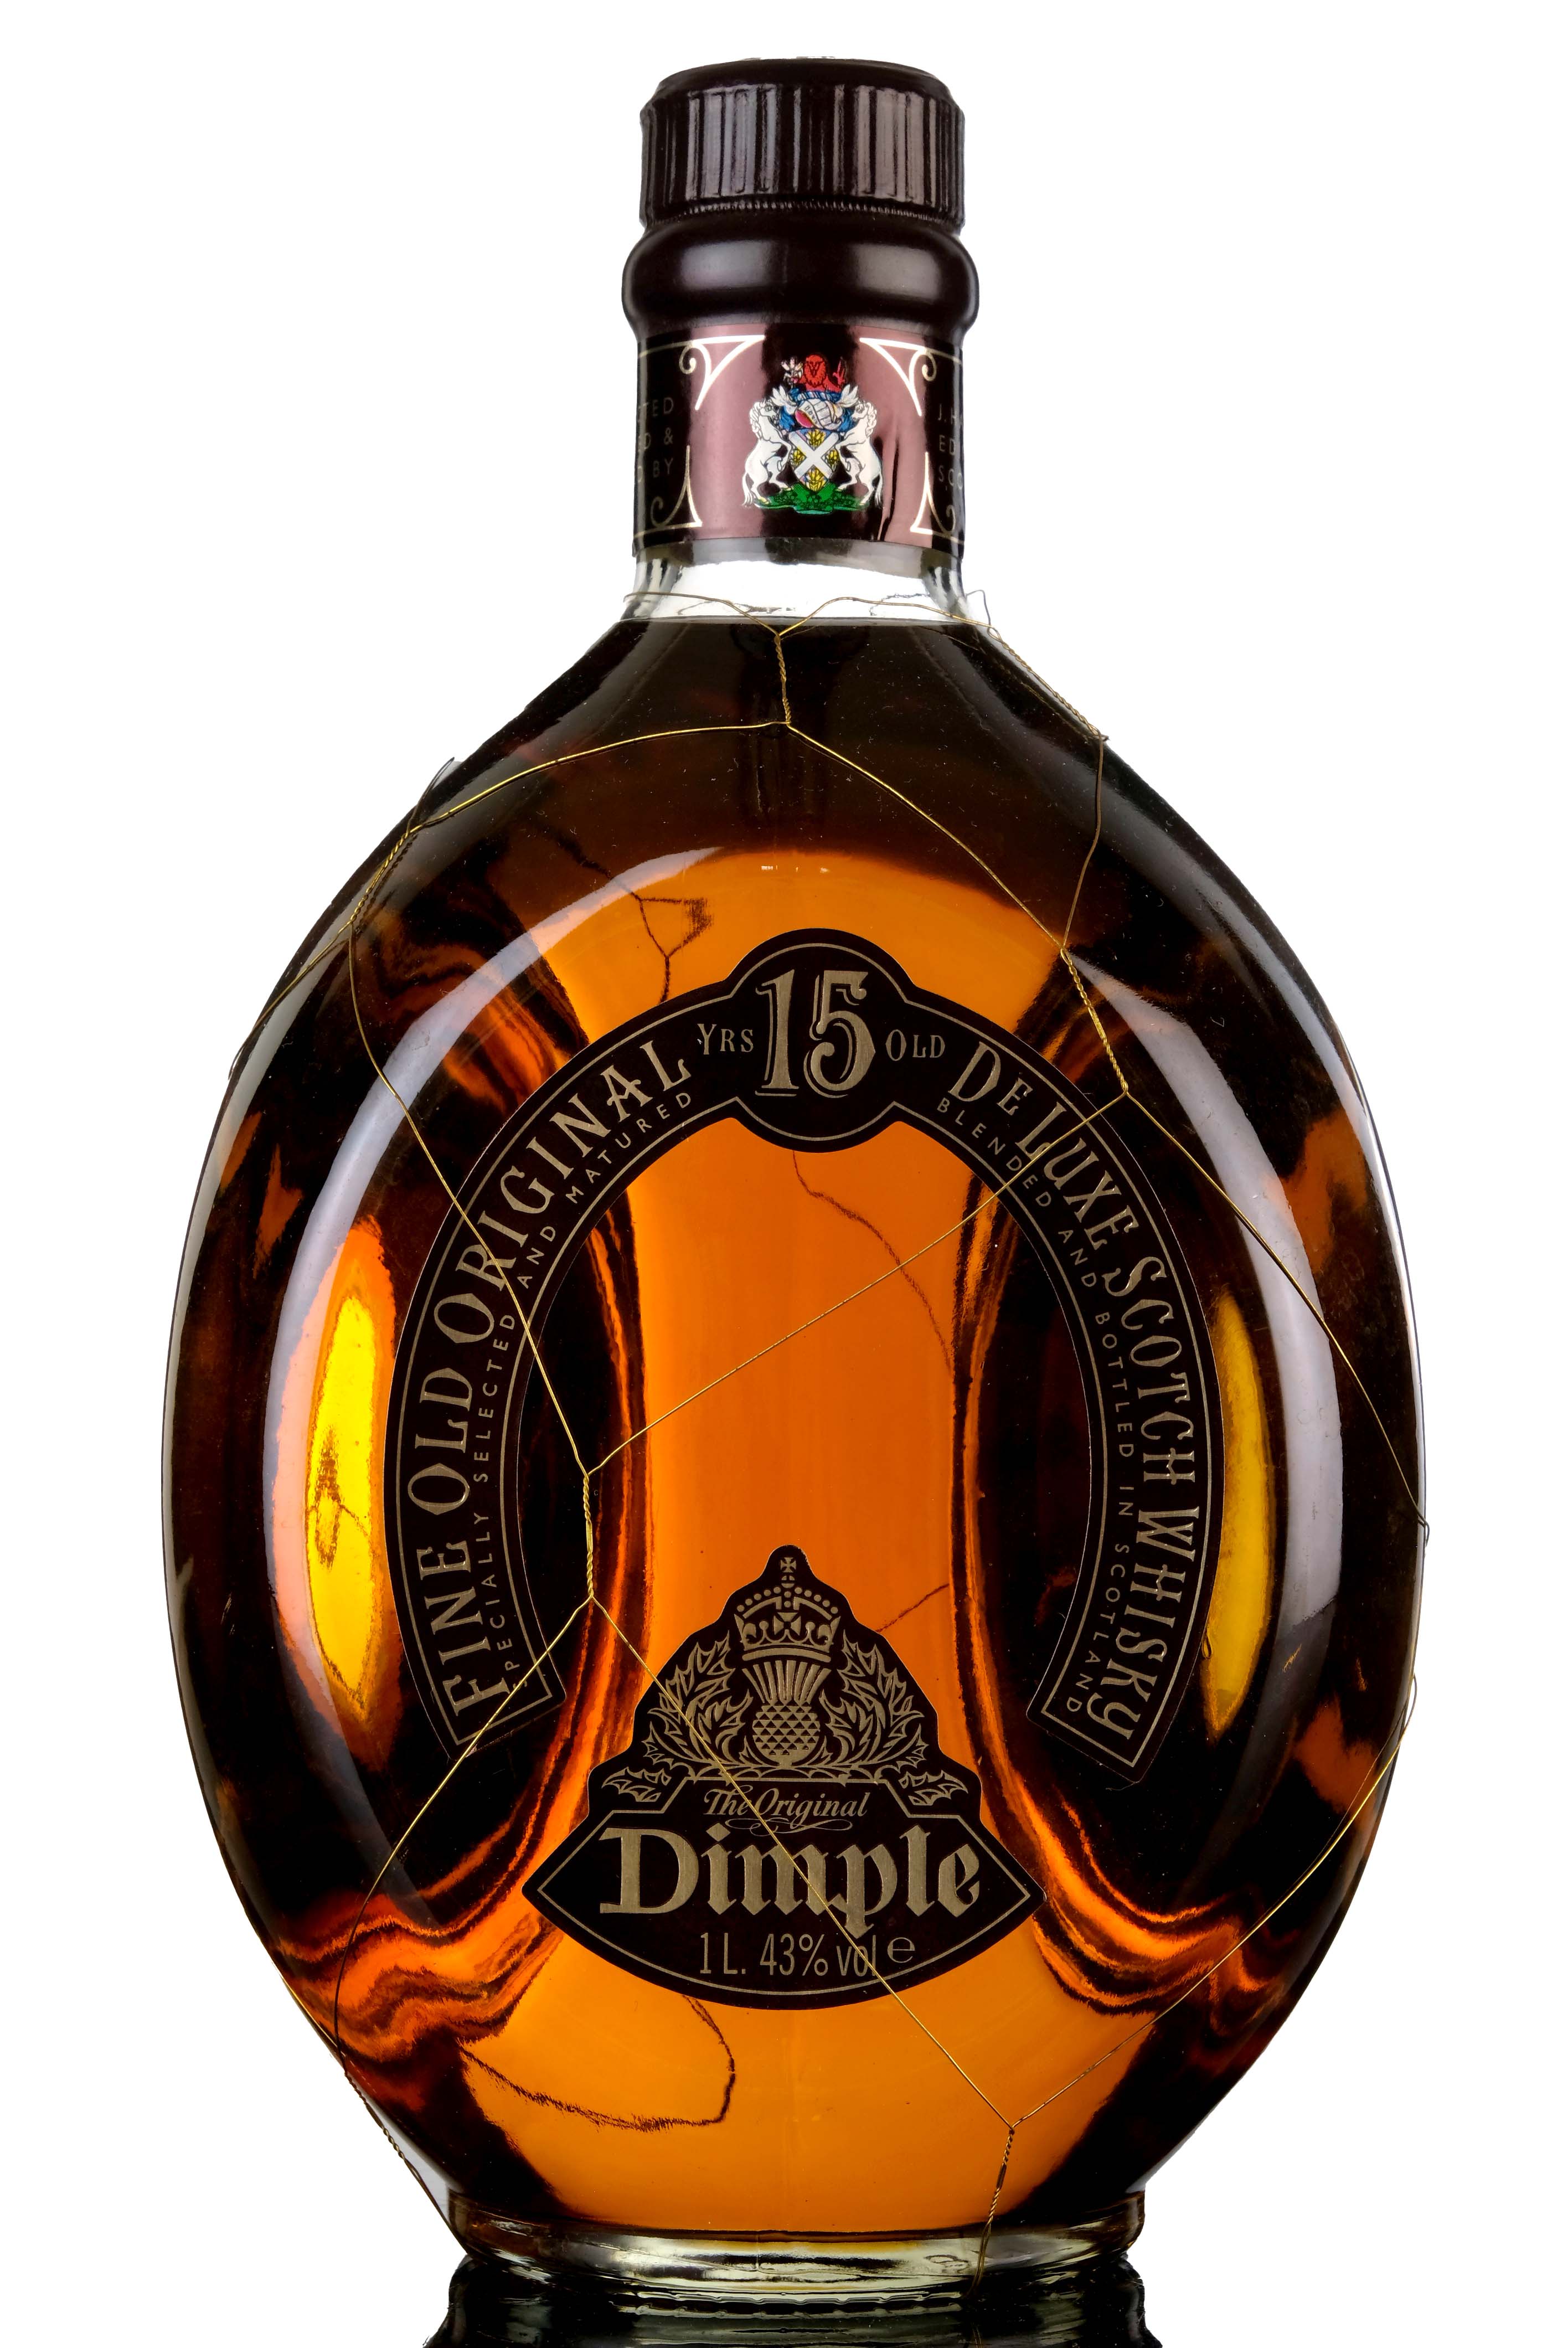 Dimple 15 Year Old - 1 Litre